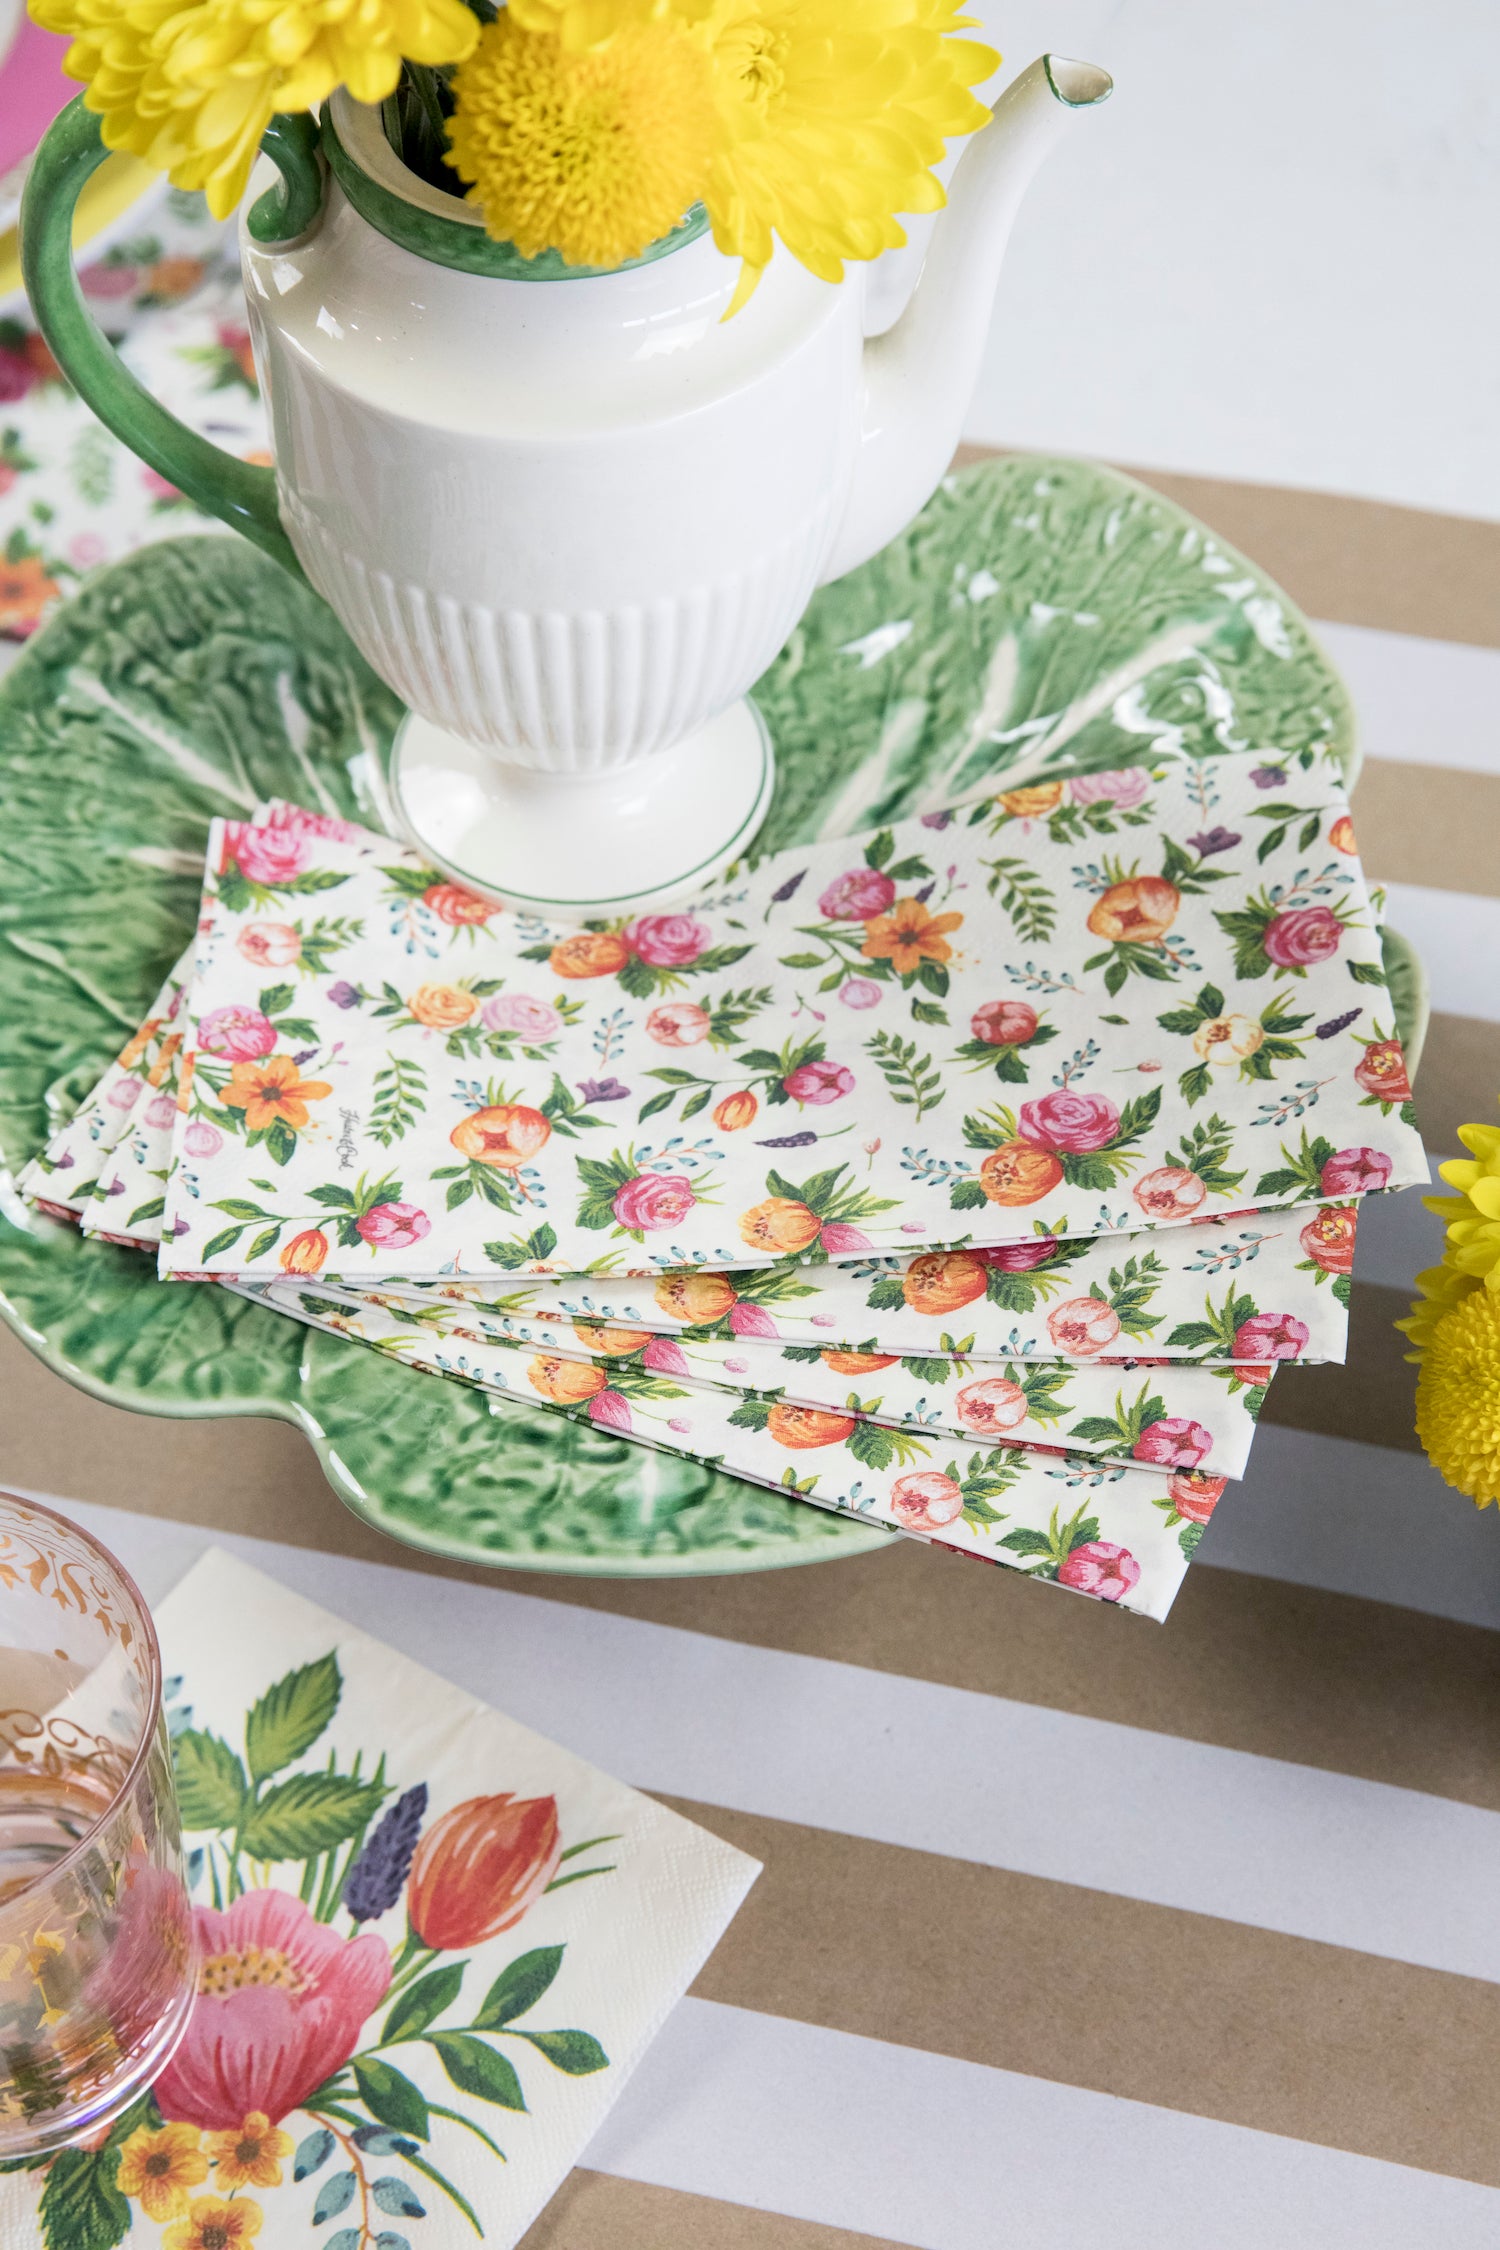 Four Sweet Garden Guest Napkins fanned out on a green plate in a floral table setting.